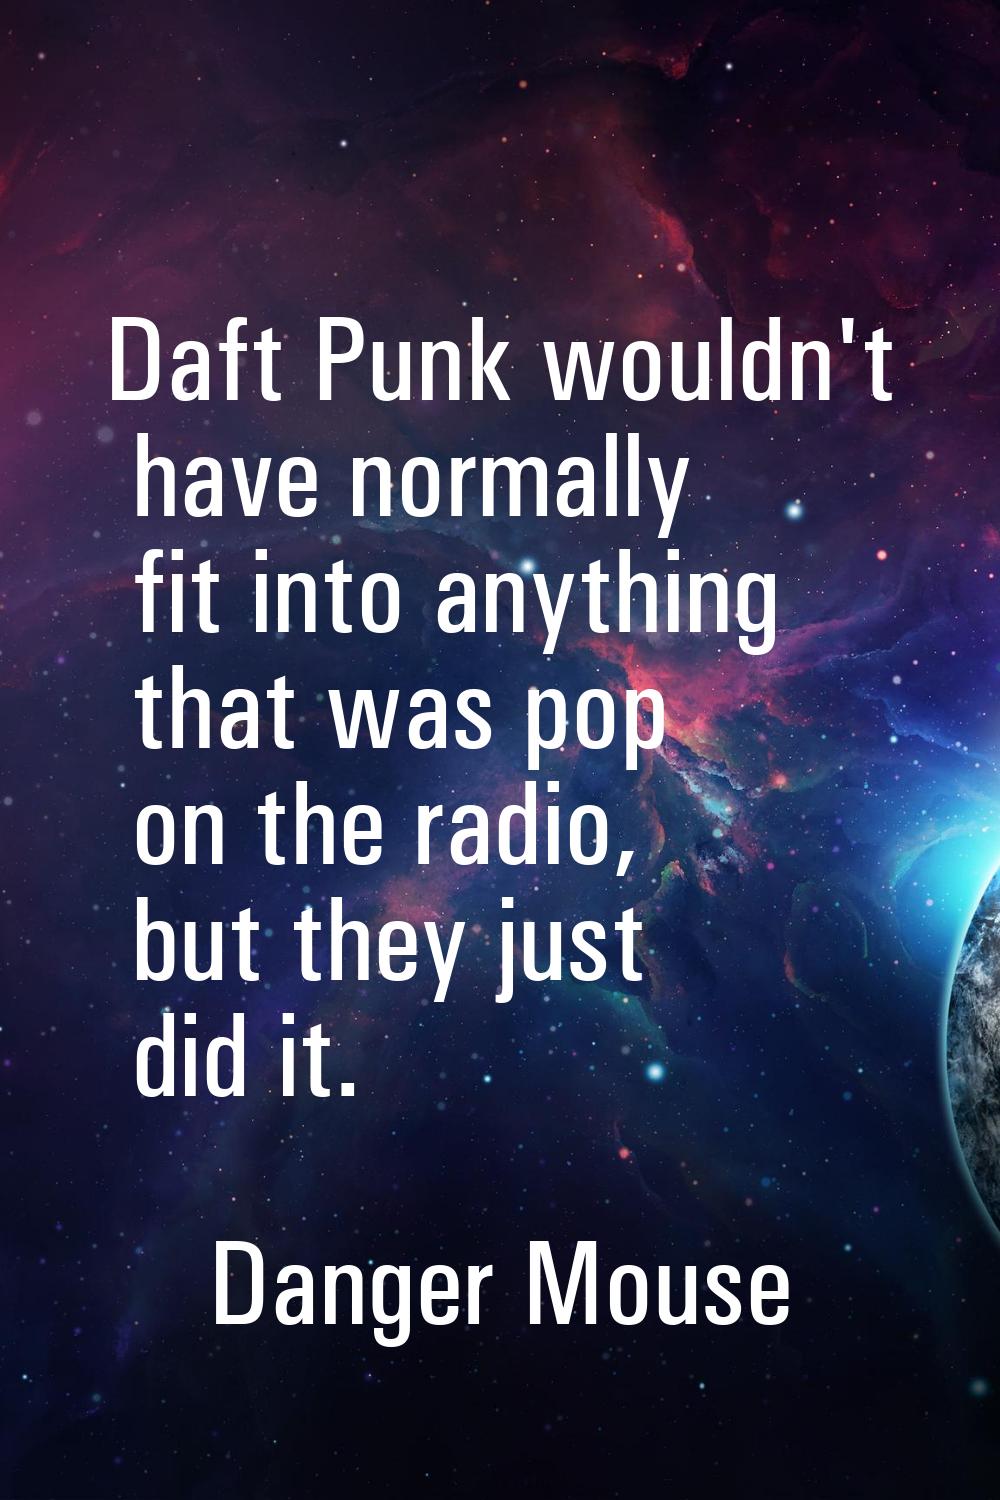 Daft Punk wouldn't have normally fit into anything that was pop on the radio, but they just did it.